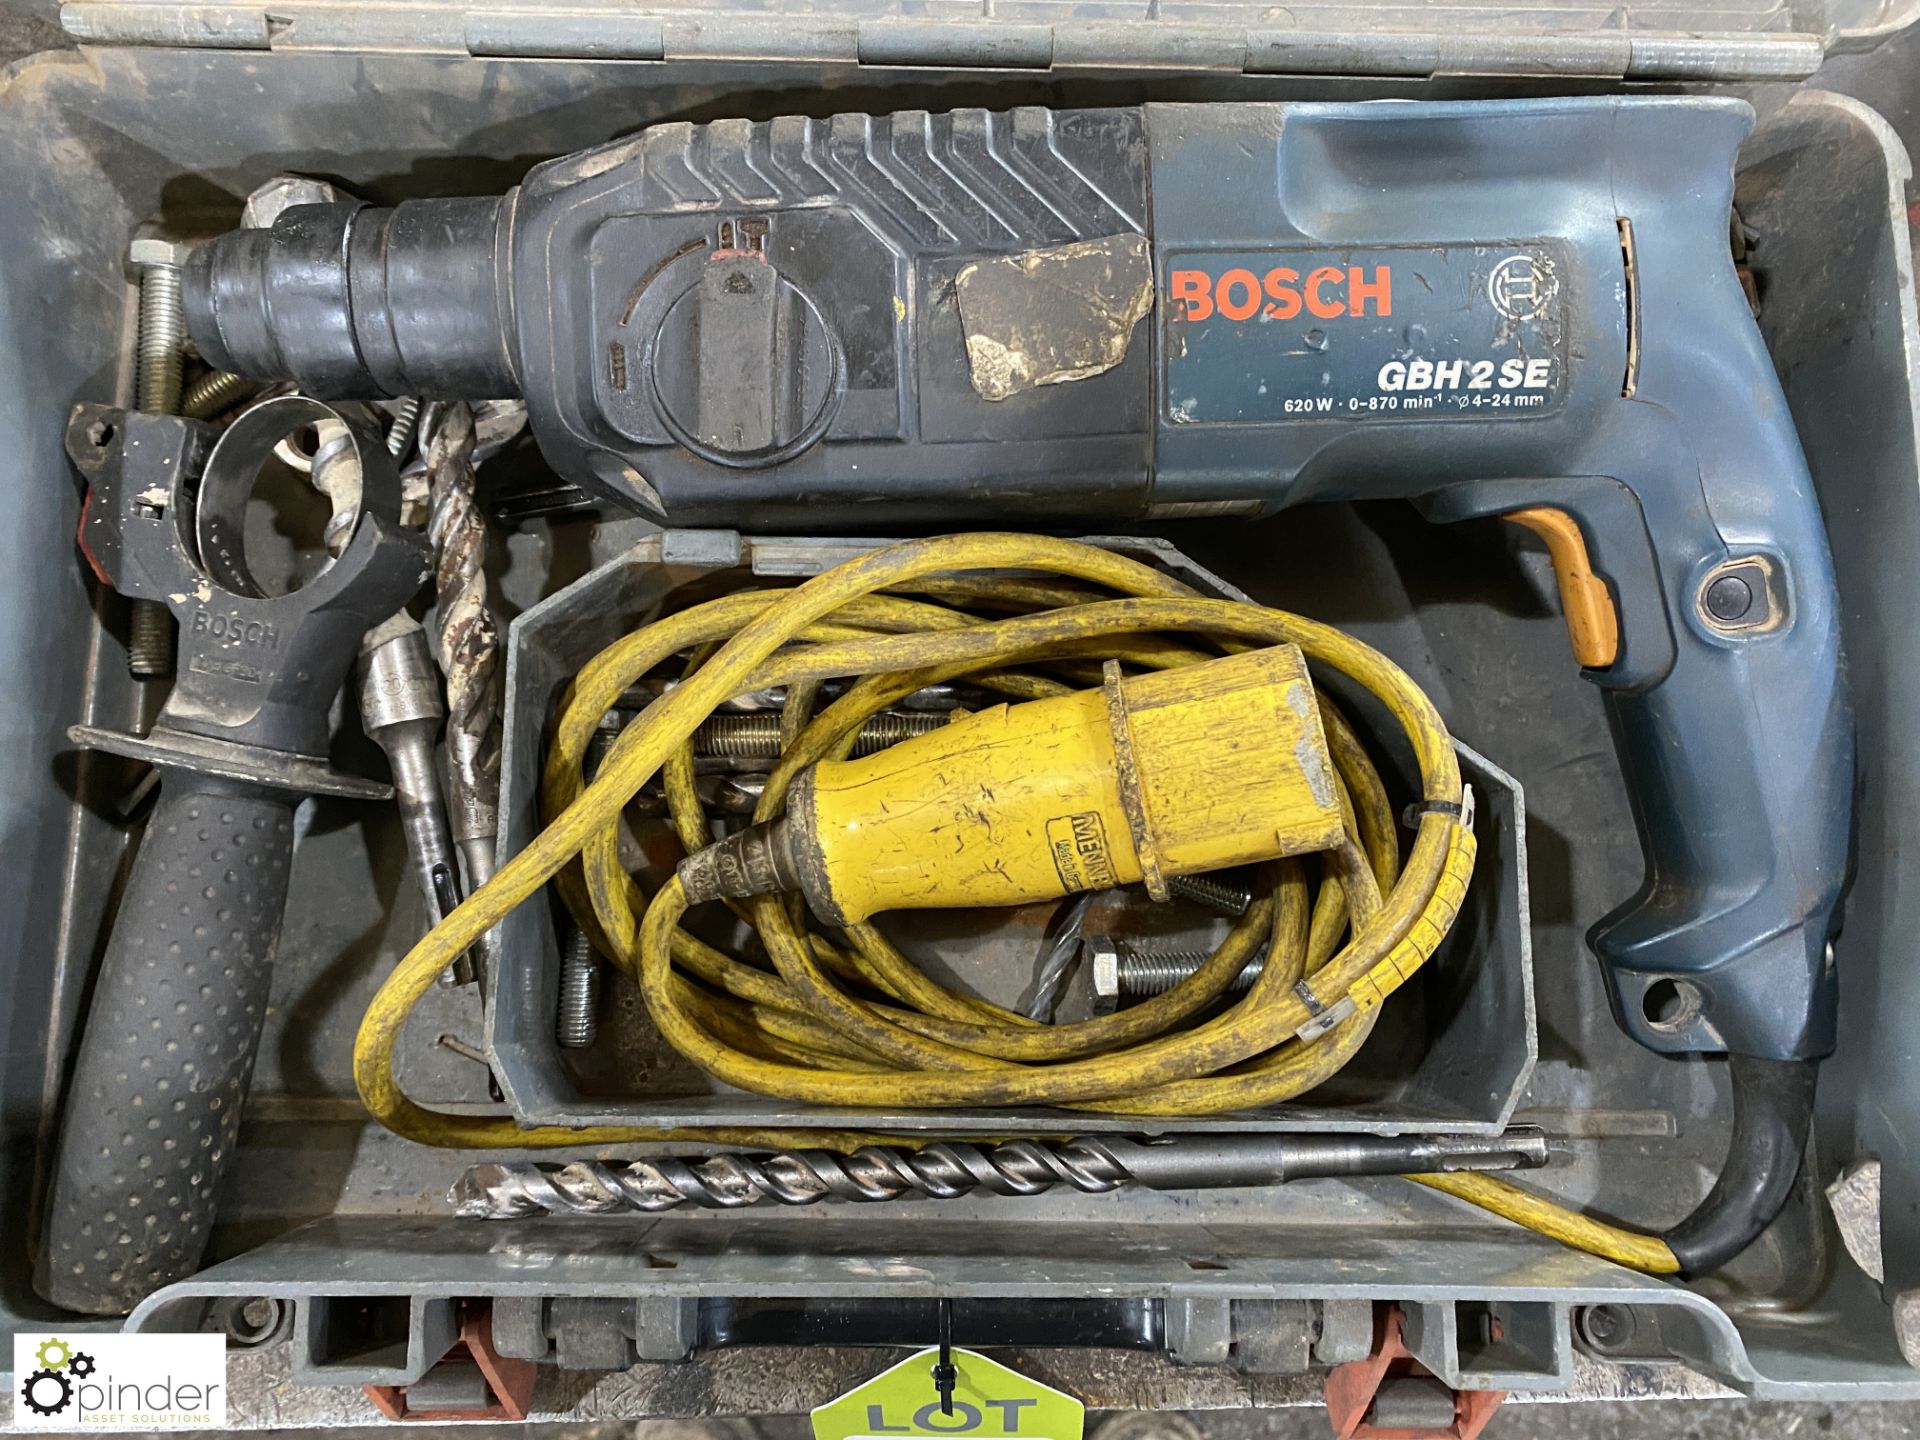 Bosch GBH2SE Hammer Drill, 110volts, with case